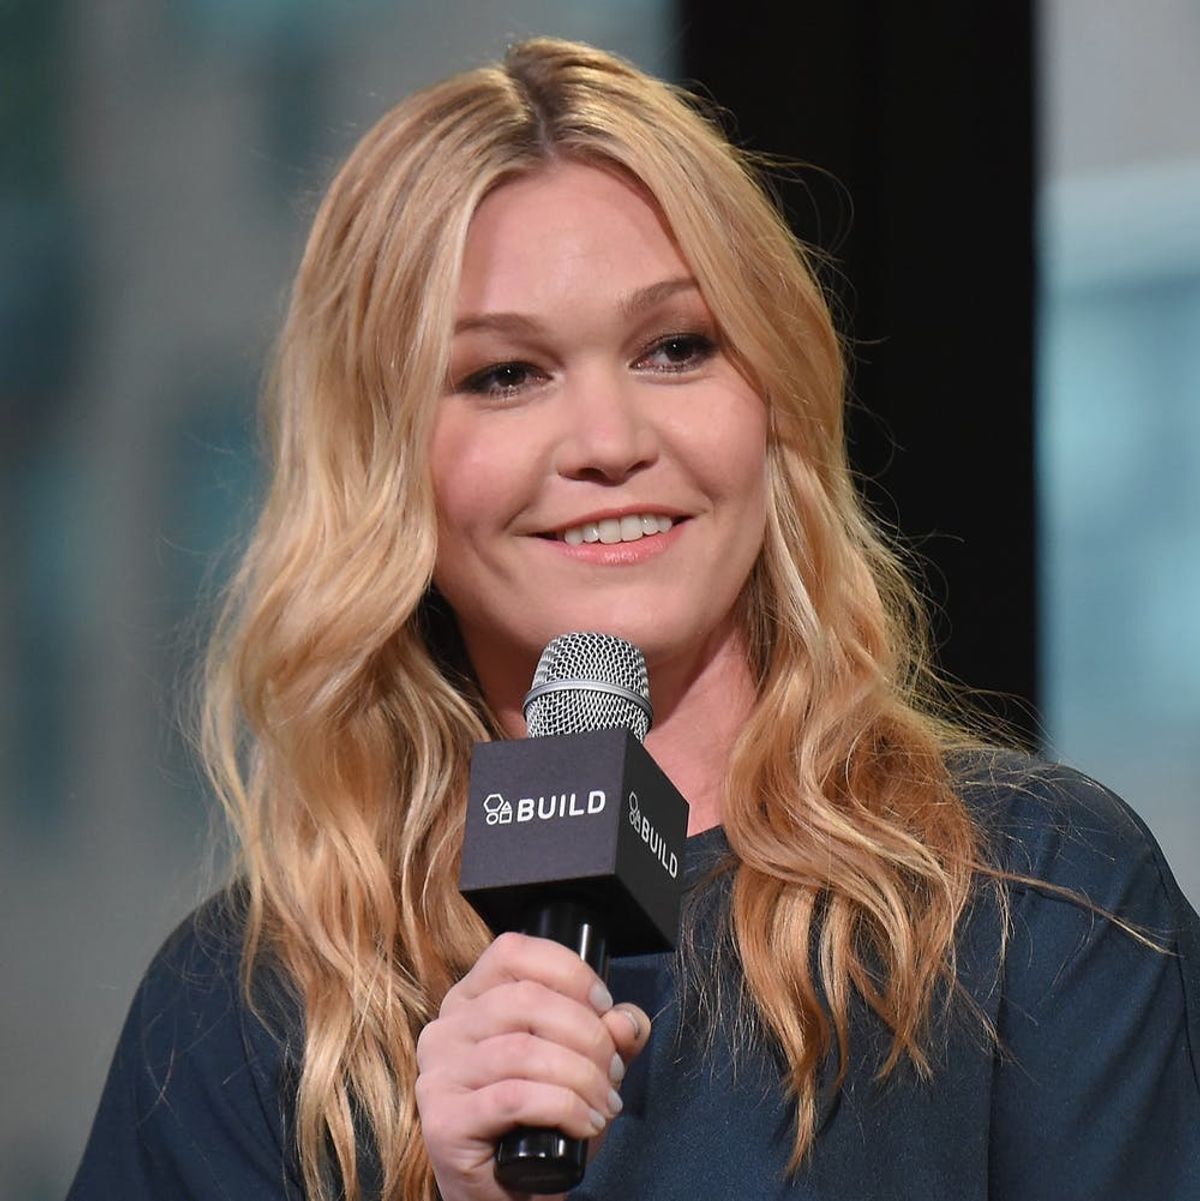 Julia Stiles Shows Off Baby Bump While Camping at Nearly 8 Months Pregnant